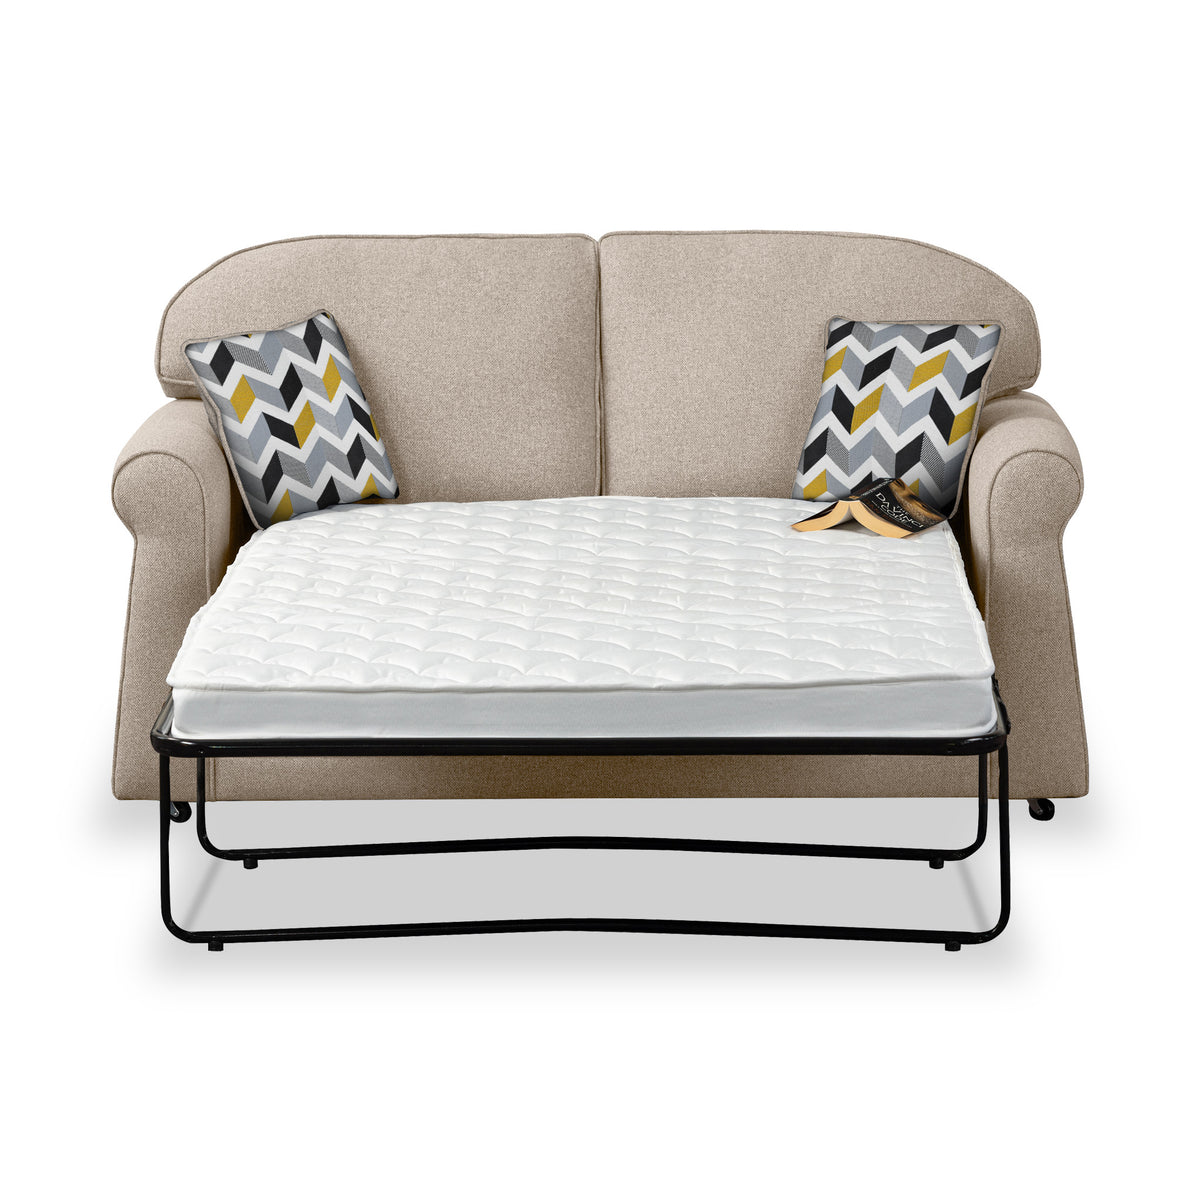 Giselle Fawn Soft Weave 2 Seater Sofabed with Mustard Scatter Cushions from Roseland Furniture